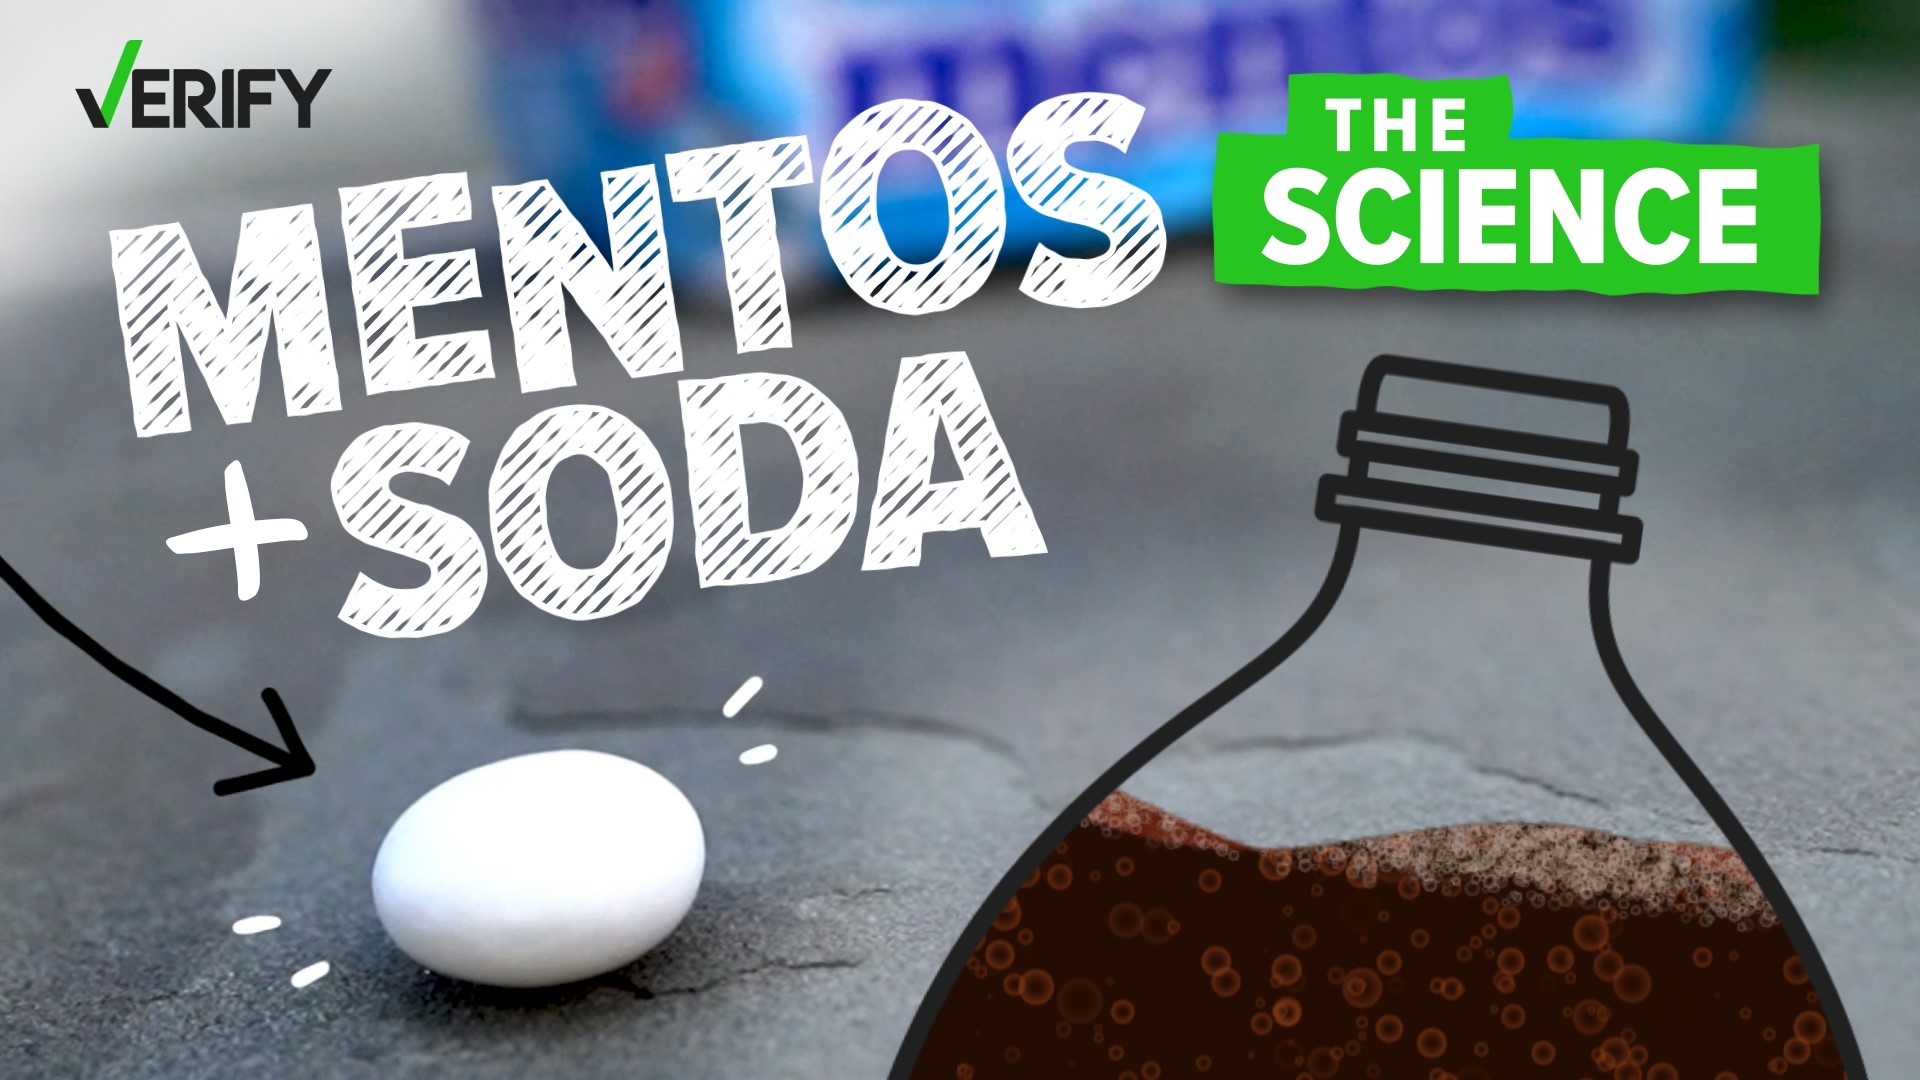 Have you ever wondered what makes a Mento cause a soda to explode? The VERIFY team is here to help with this short explainer.